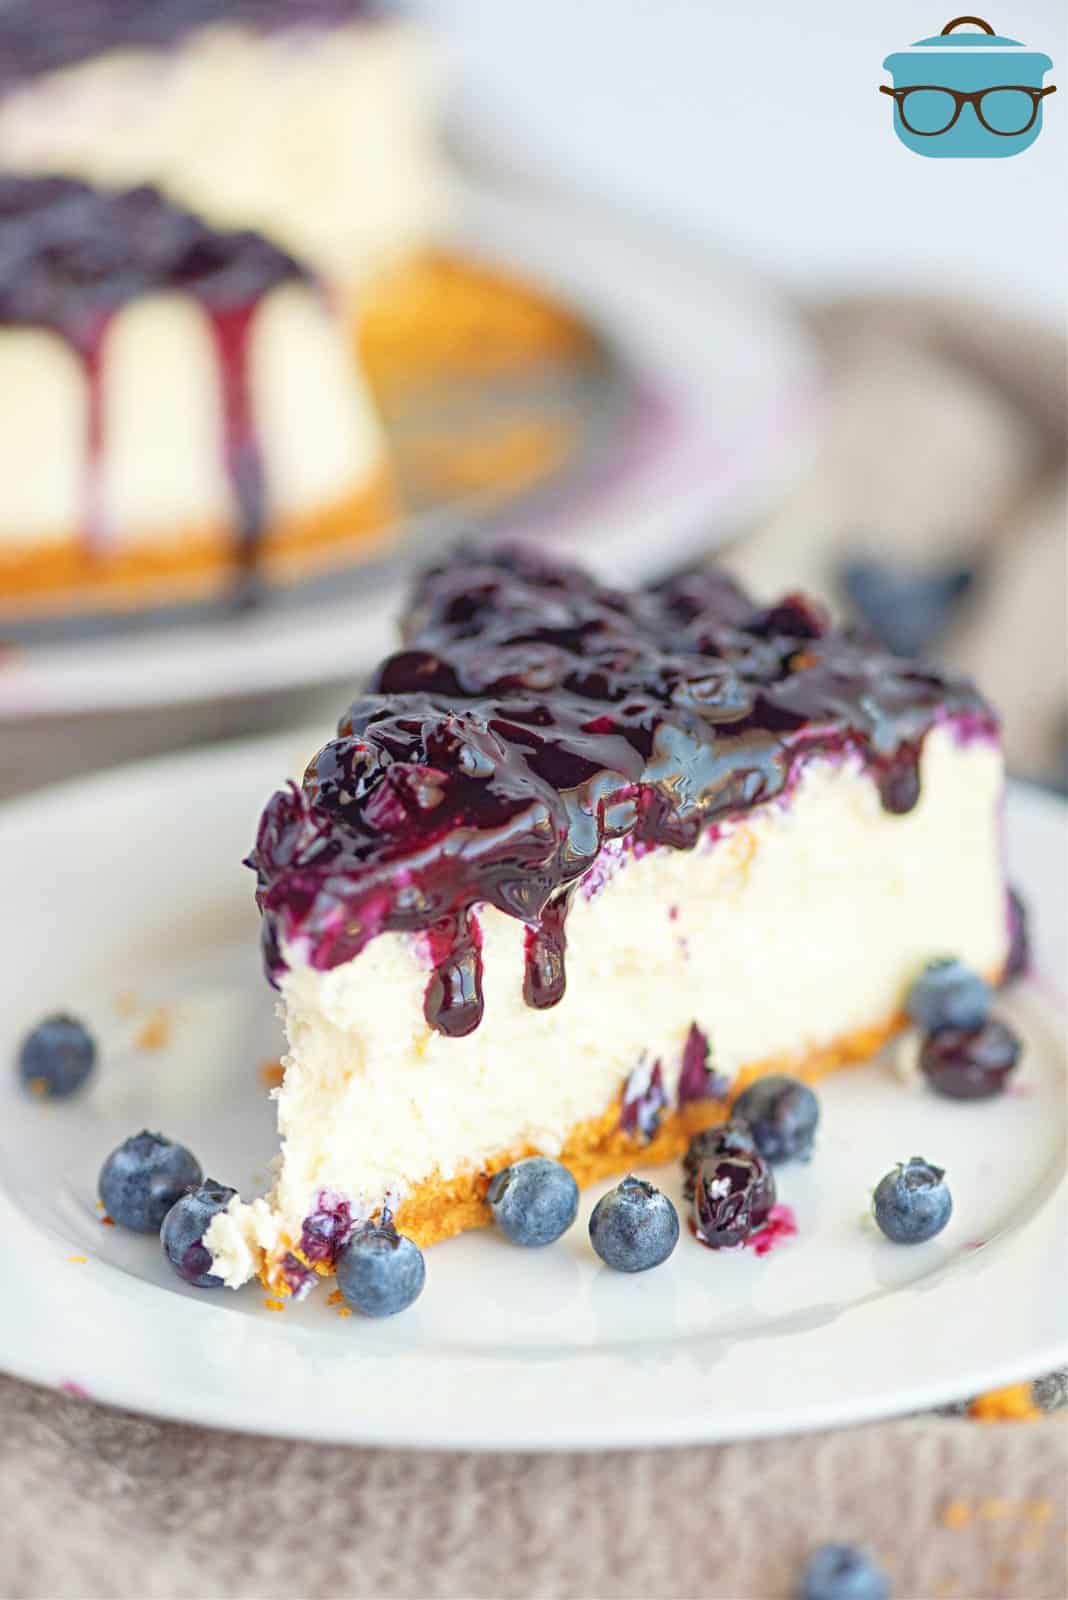 Slice of Blueberry Cheesecake on white plate covered with blueberry sauce.